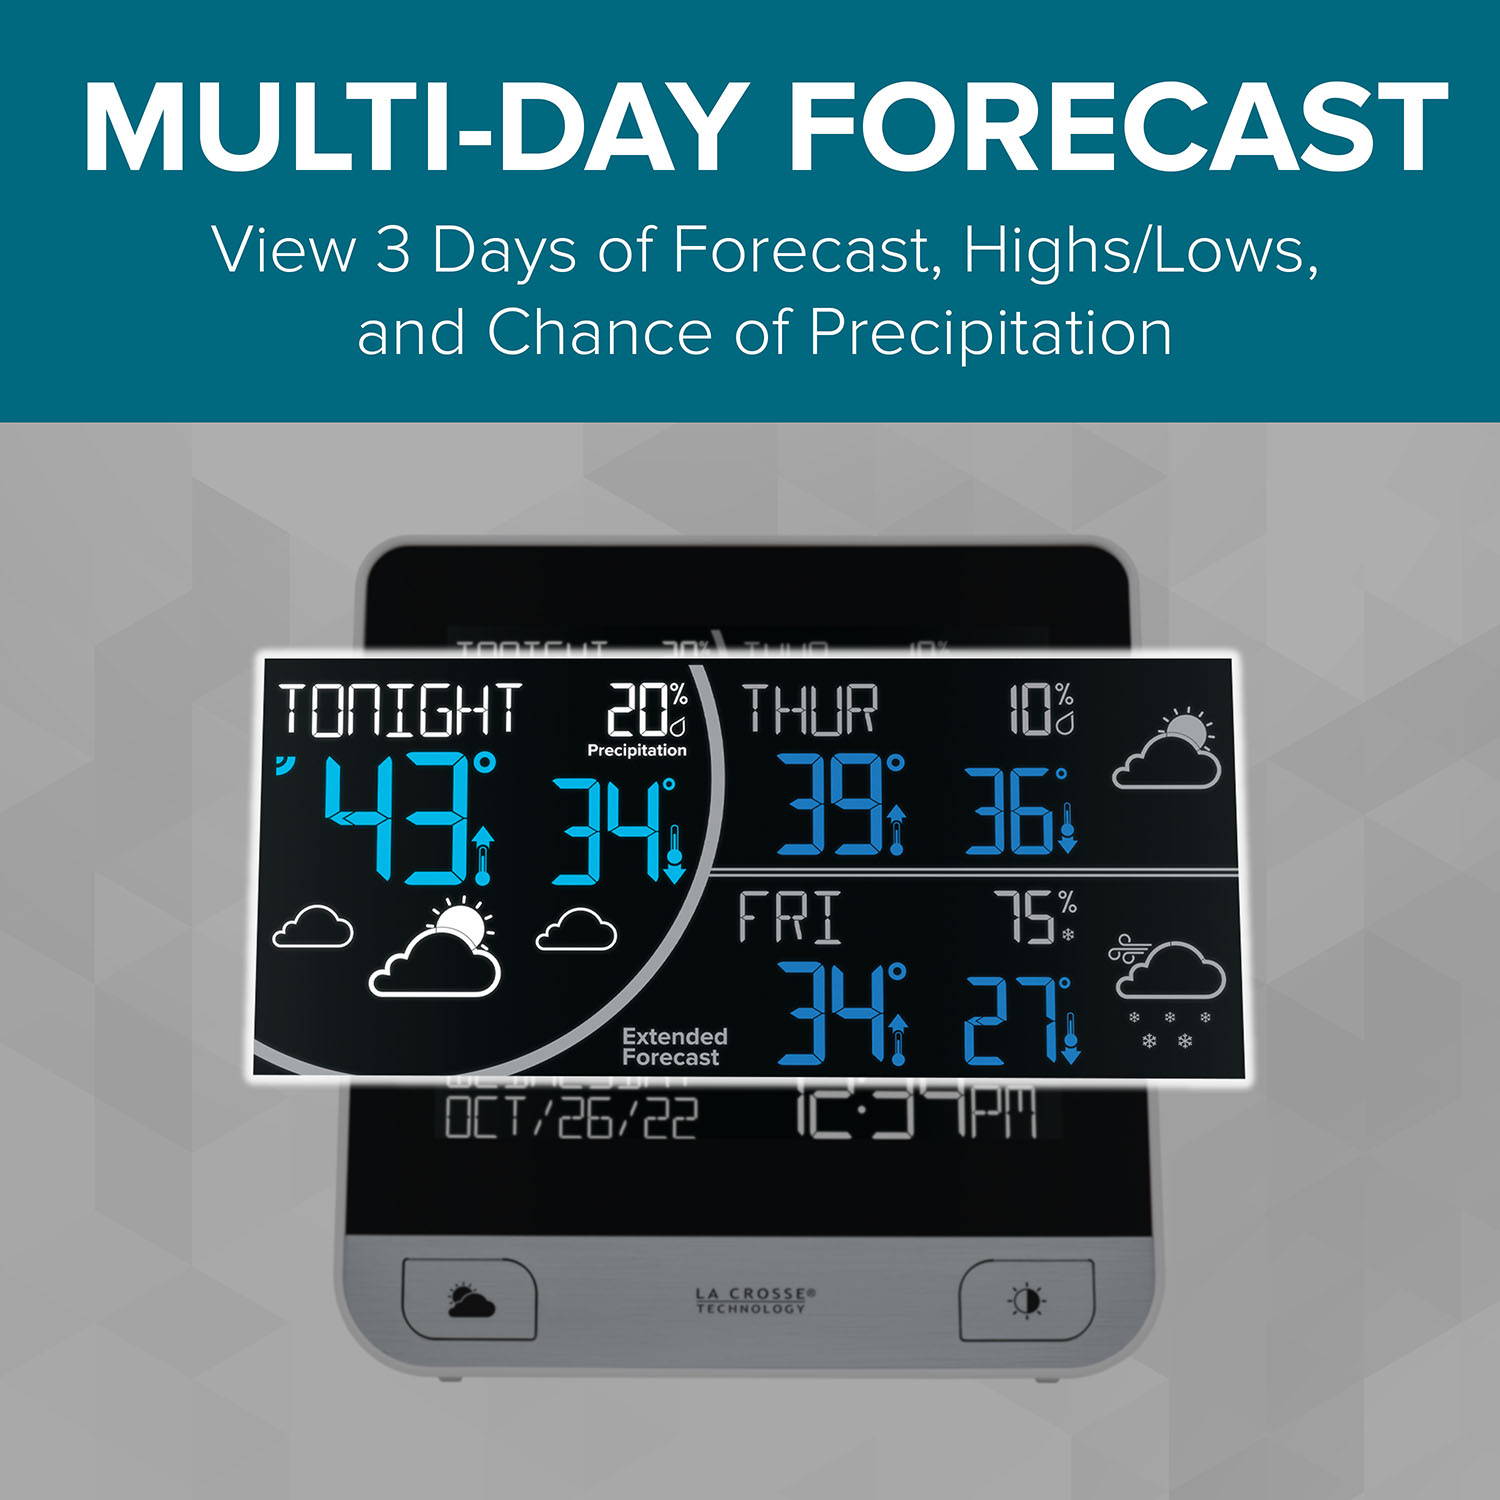 Today's Forecast - Check daily forecast predictions, high and low temps, and chance of precipitations values for the days ahead.